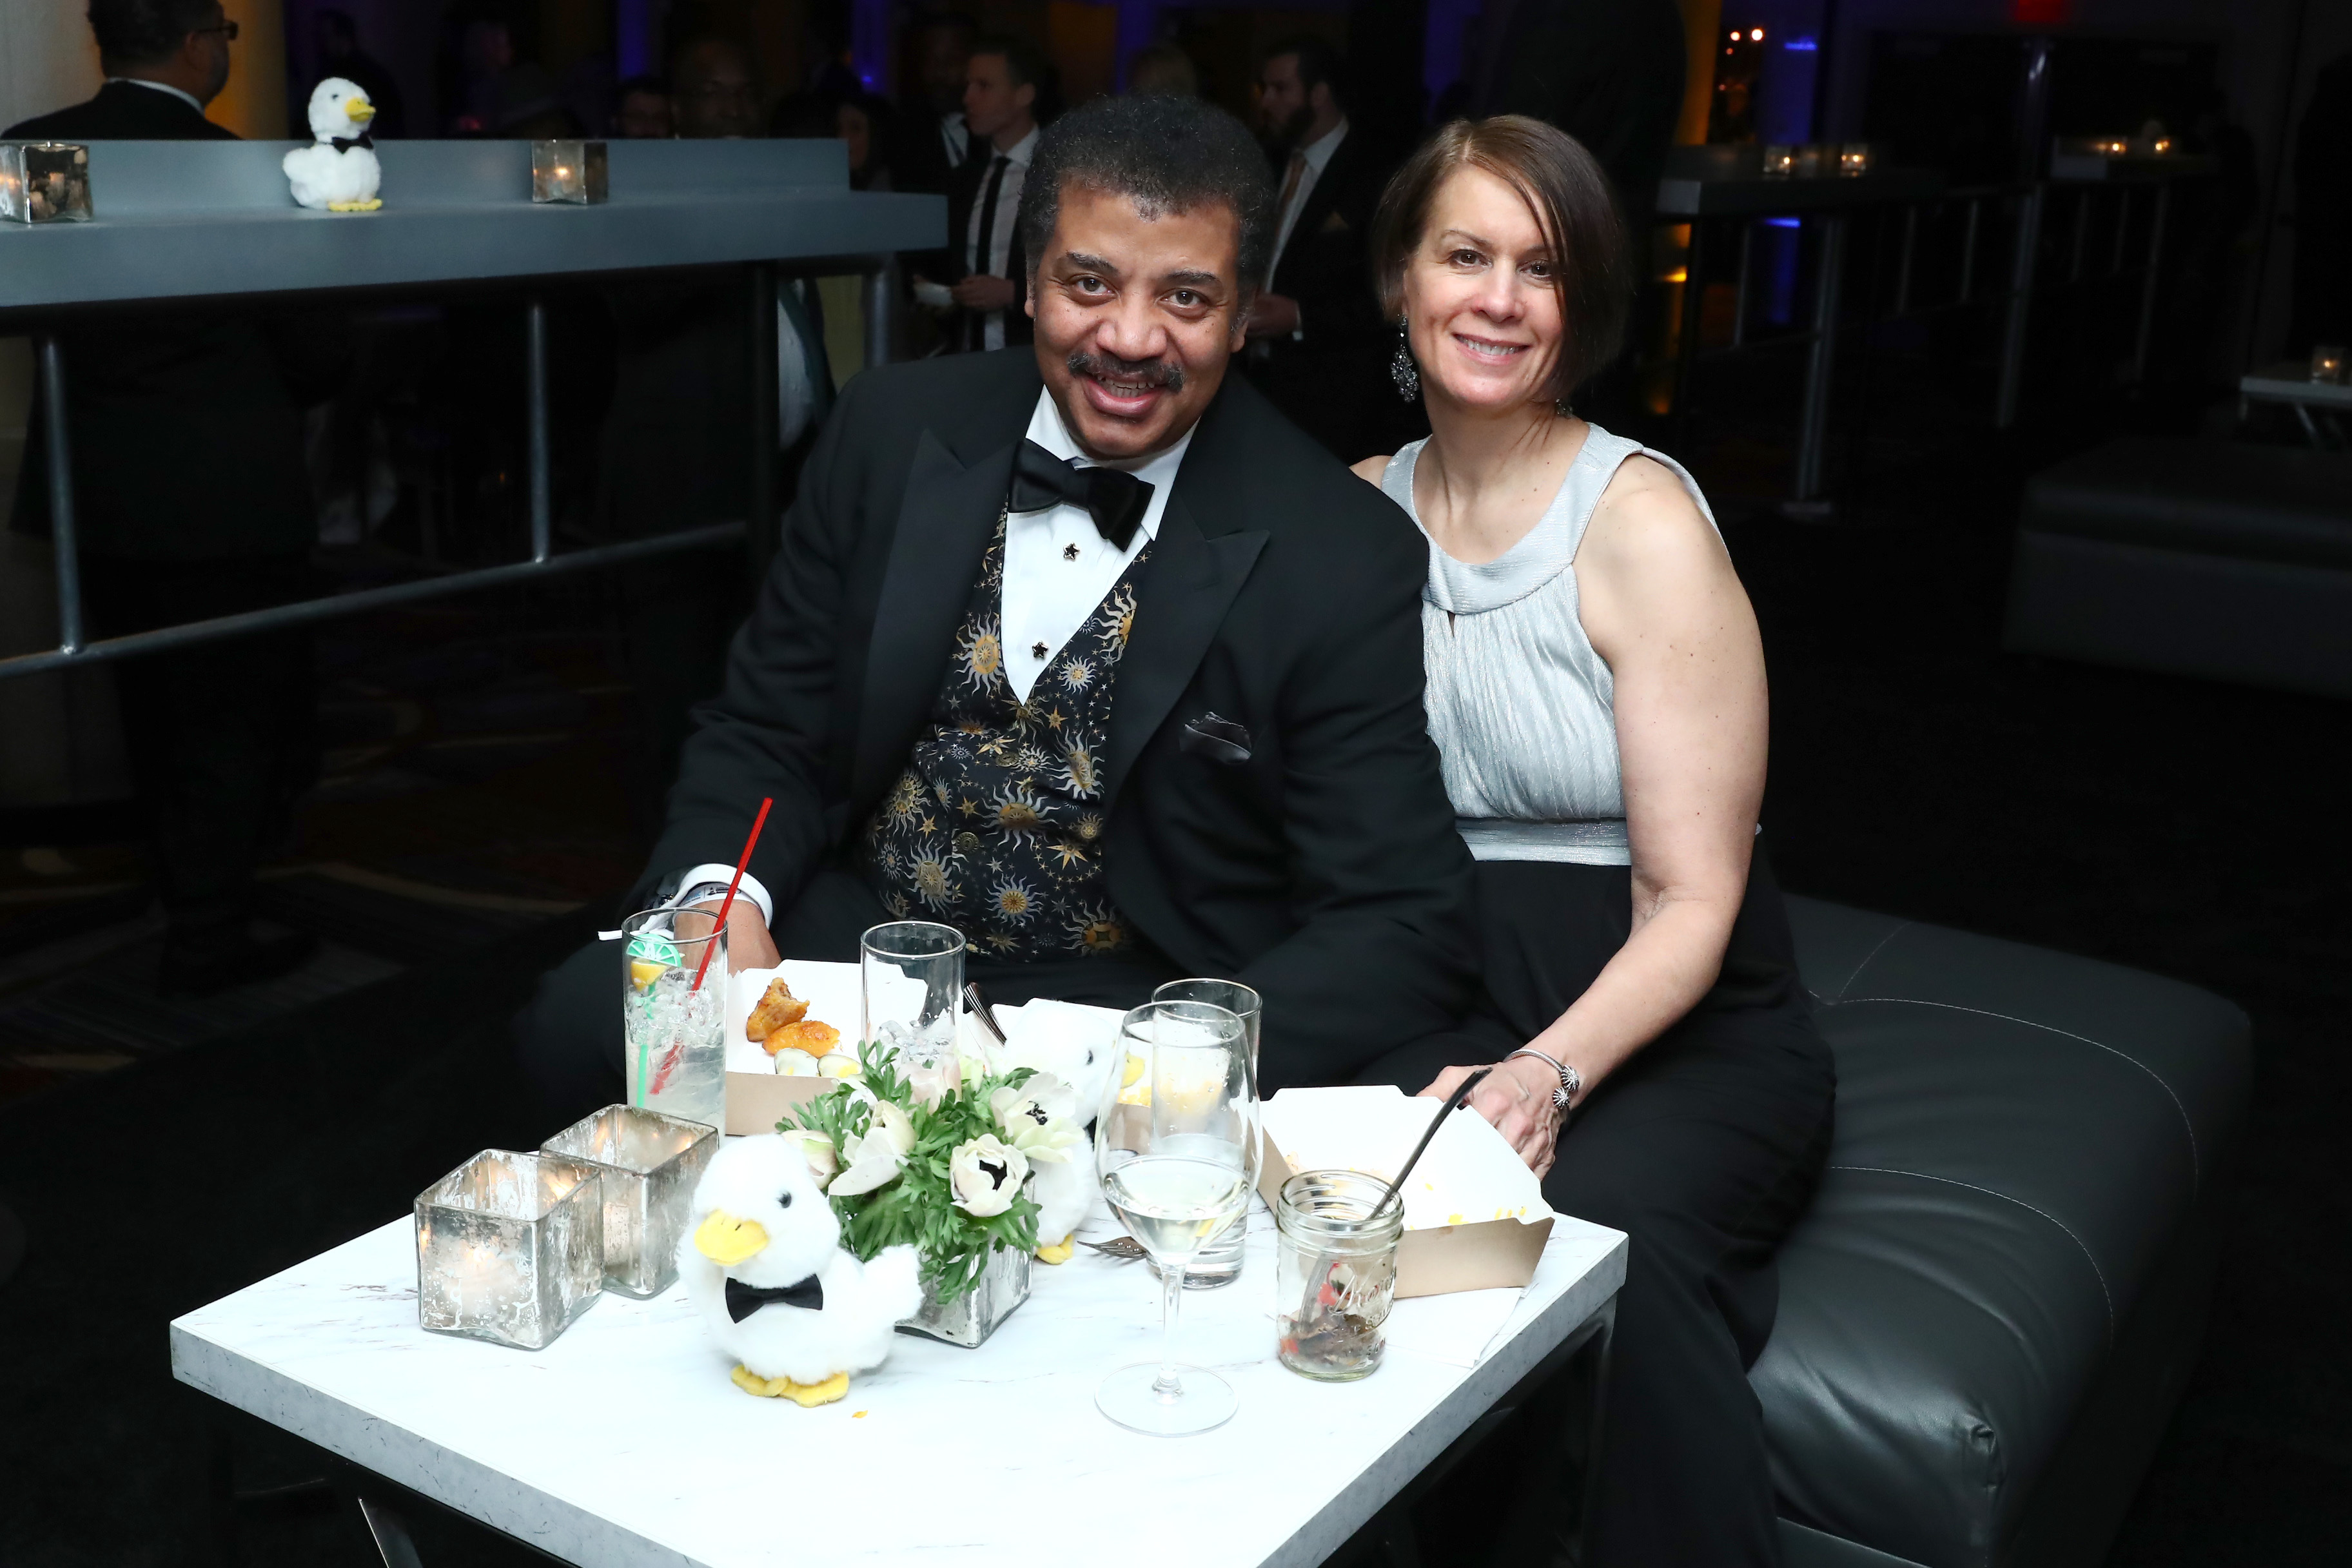 Alice Young, Neil DeGrasse Tyson’s Wife 5 Fast Facts